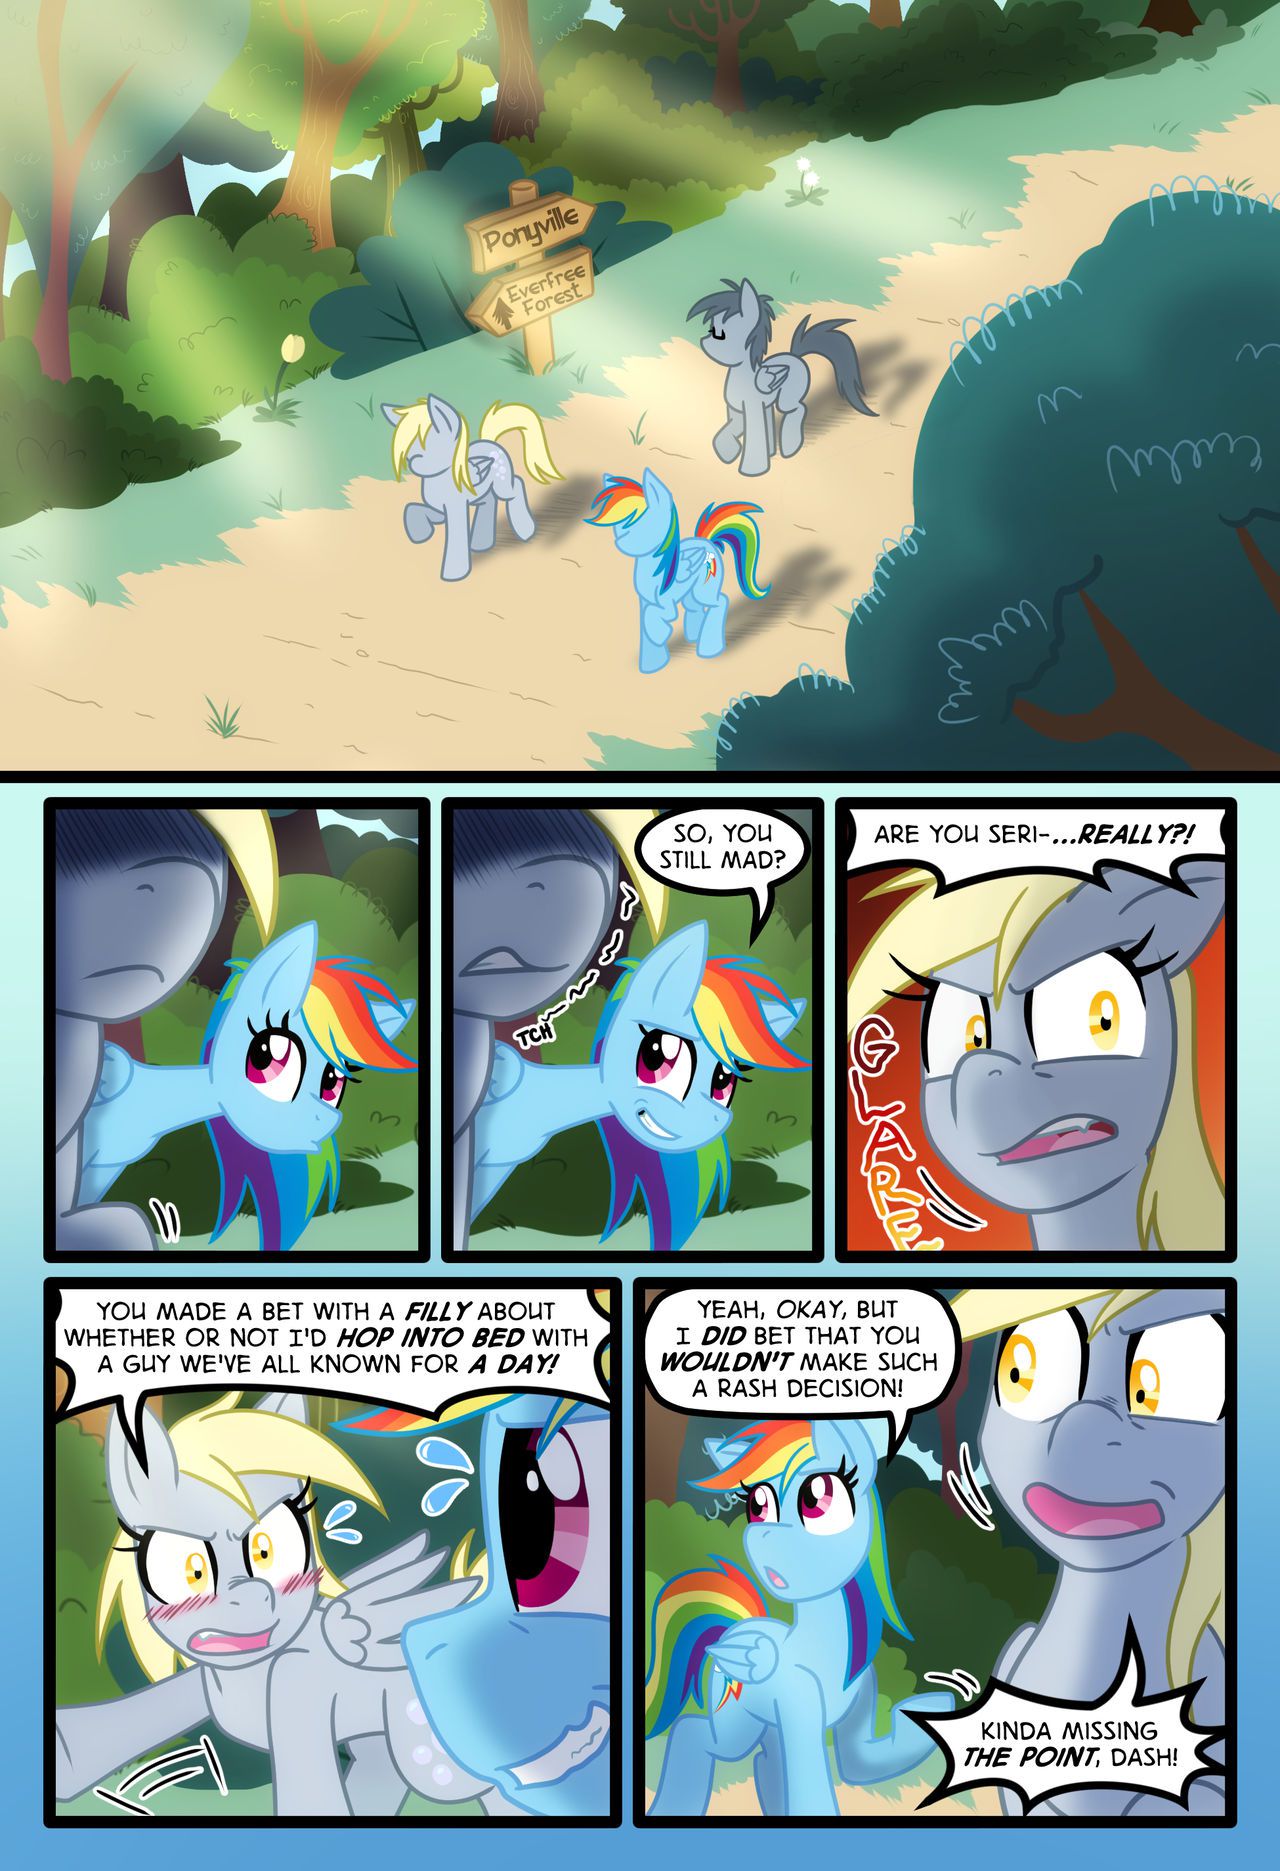 [Zaron] Lonely Hooves (My Little Pony Friendship Is Magic) [Ongoing] 223